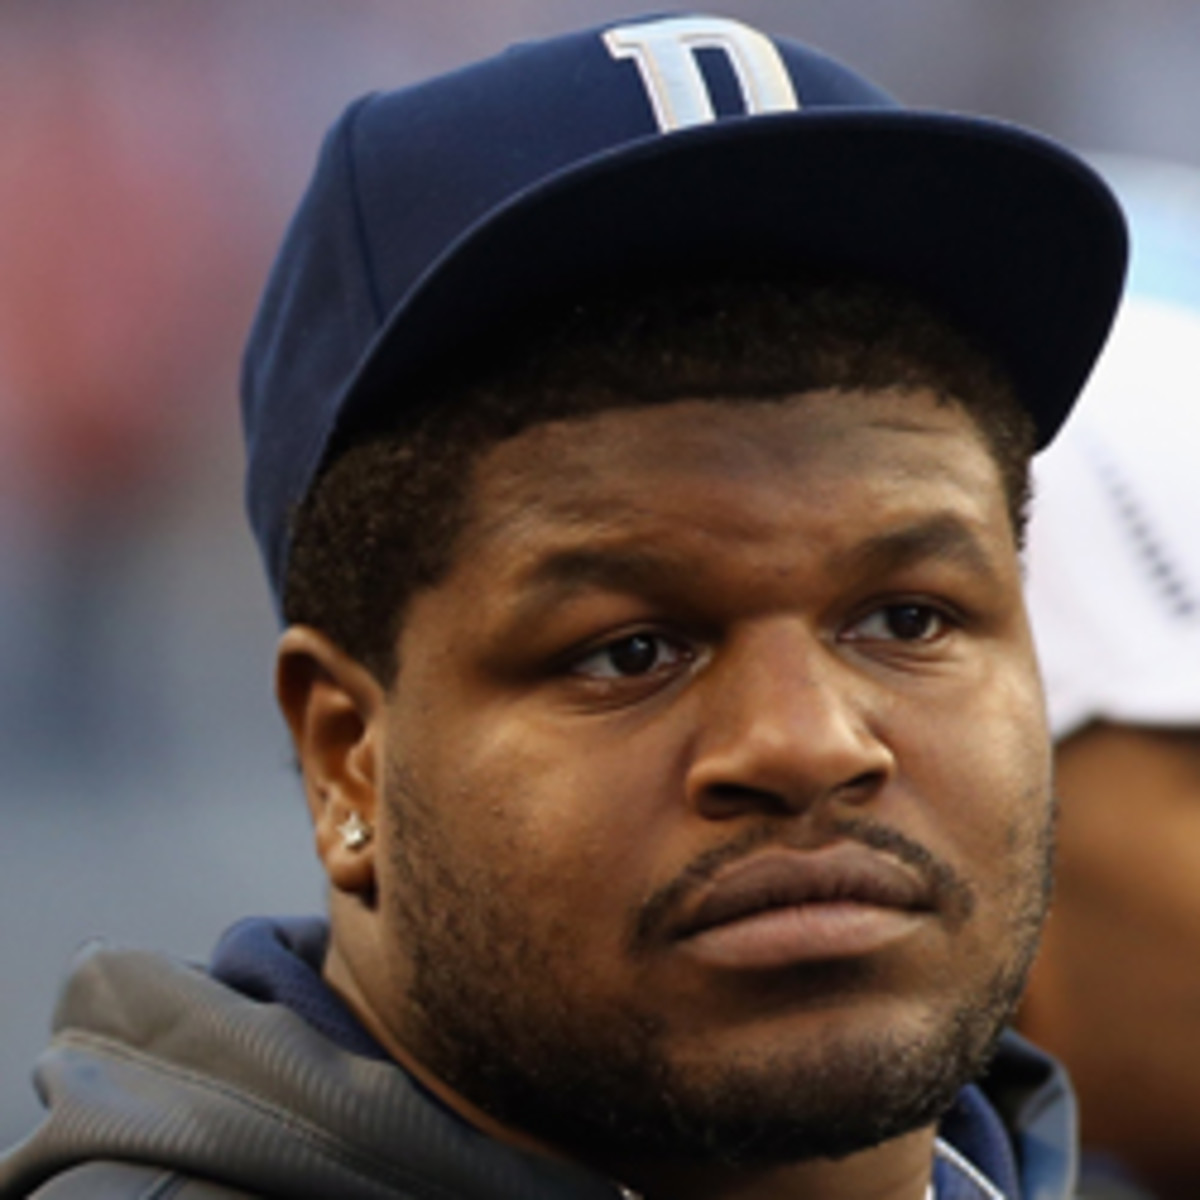 Team officials did not know Cowboys players encouraged Josh Brent to appear on the sidelines Sunday. (Ronald Martinez/Getty Images)